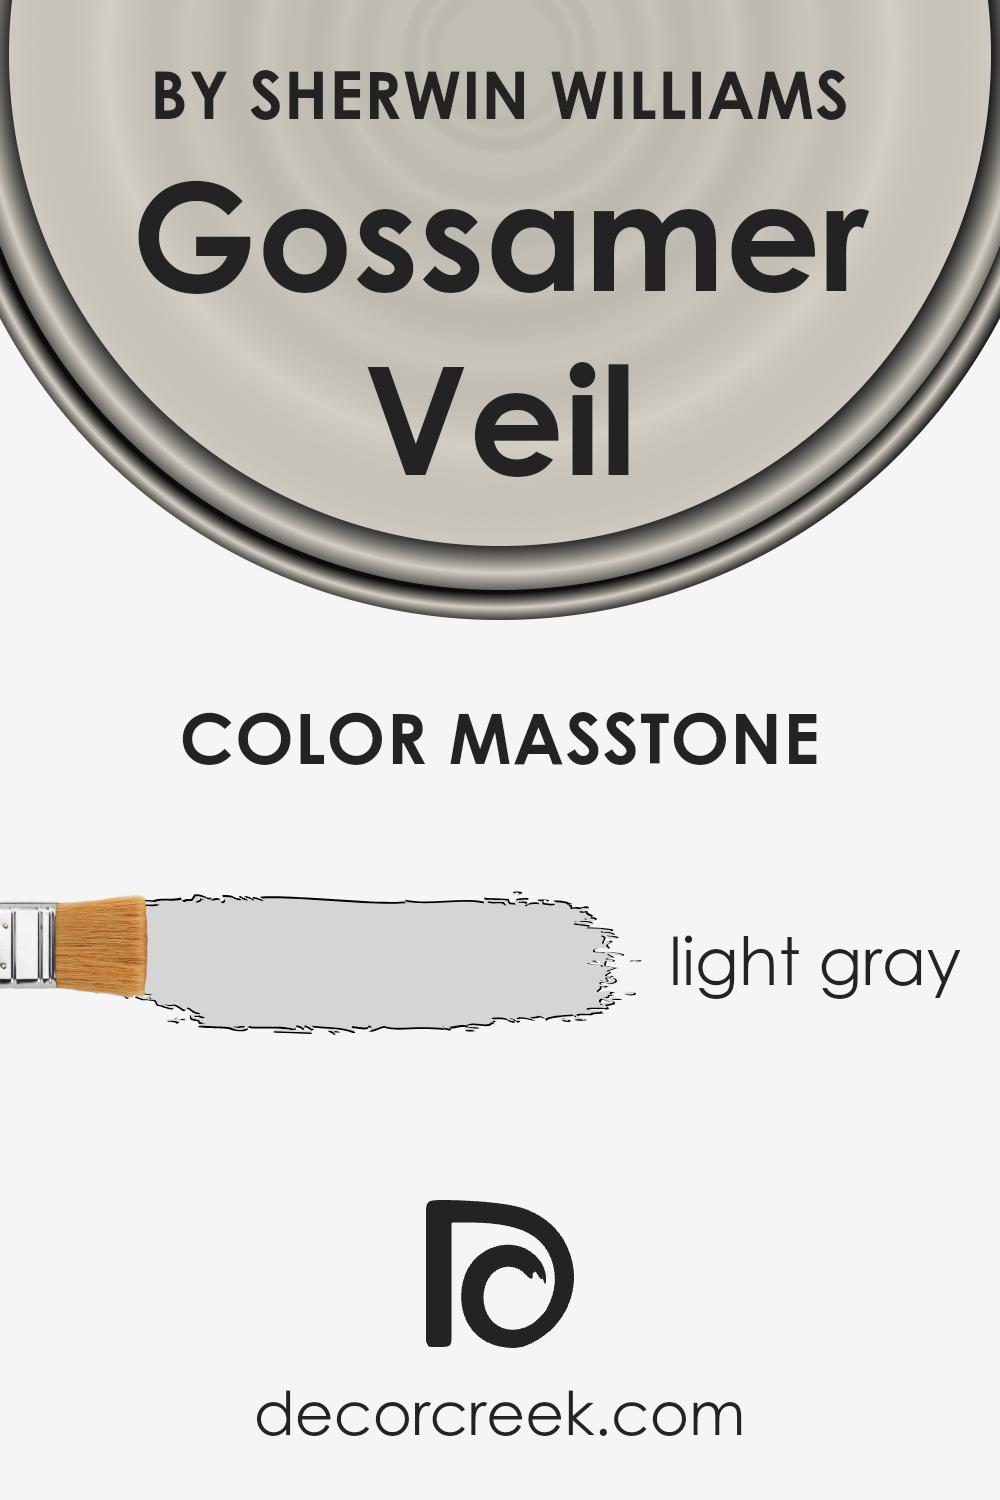 what_is_the_masstone_of_gossamer_veil_sw_9165